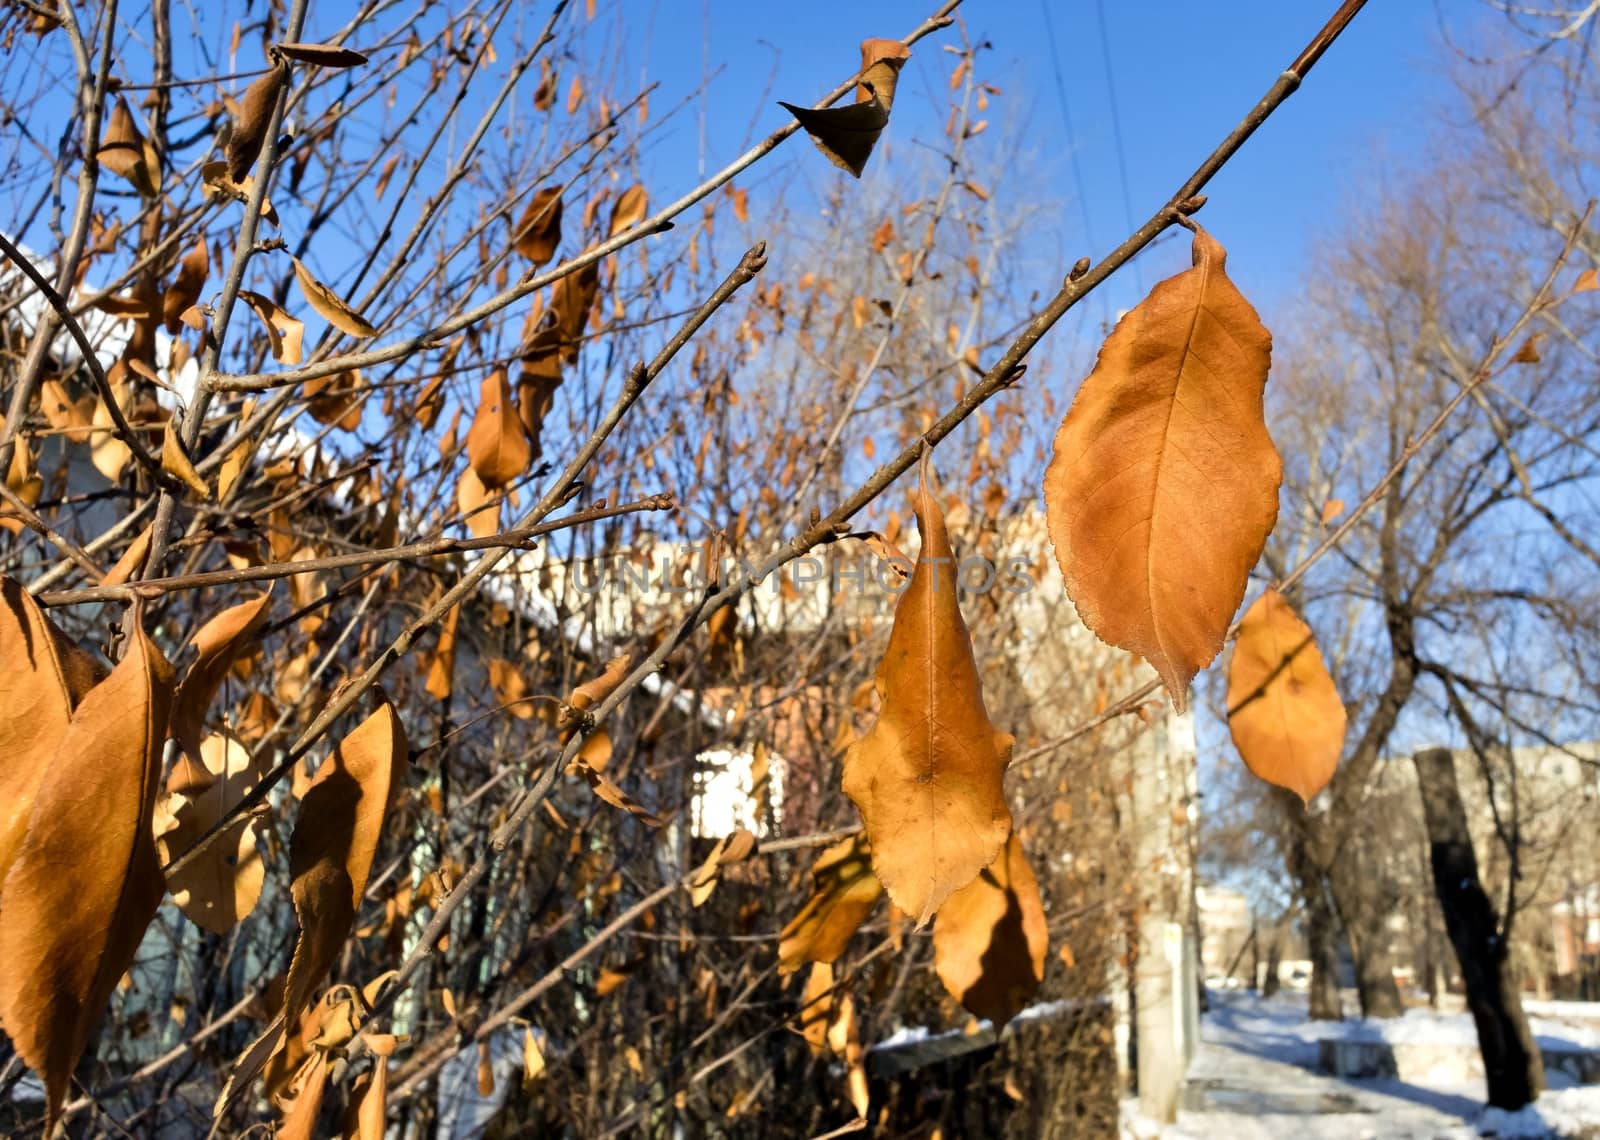 dry orange leaves on the branches in early winter by valerypetr